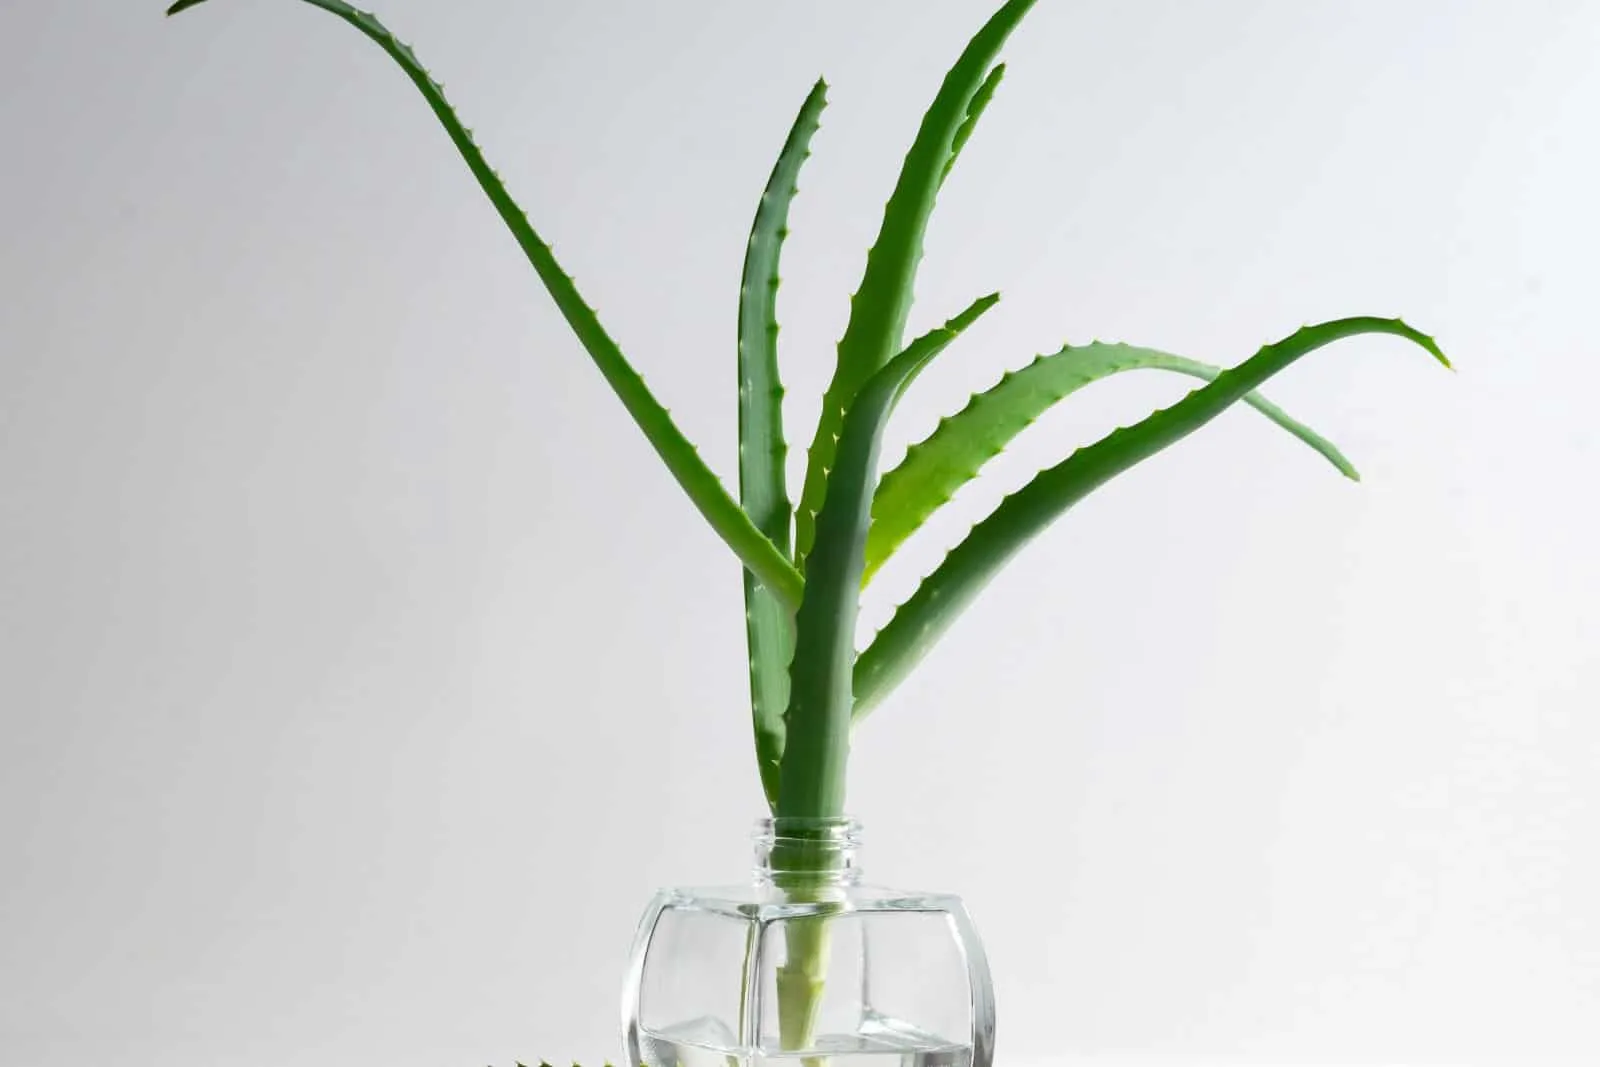 Aloe vera plant leaves in the glass jar on white background